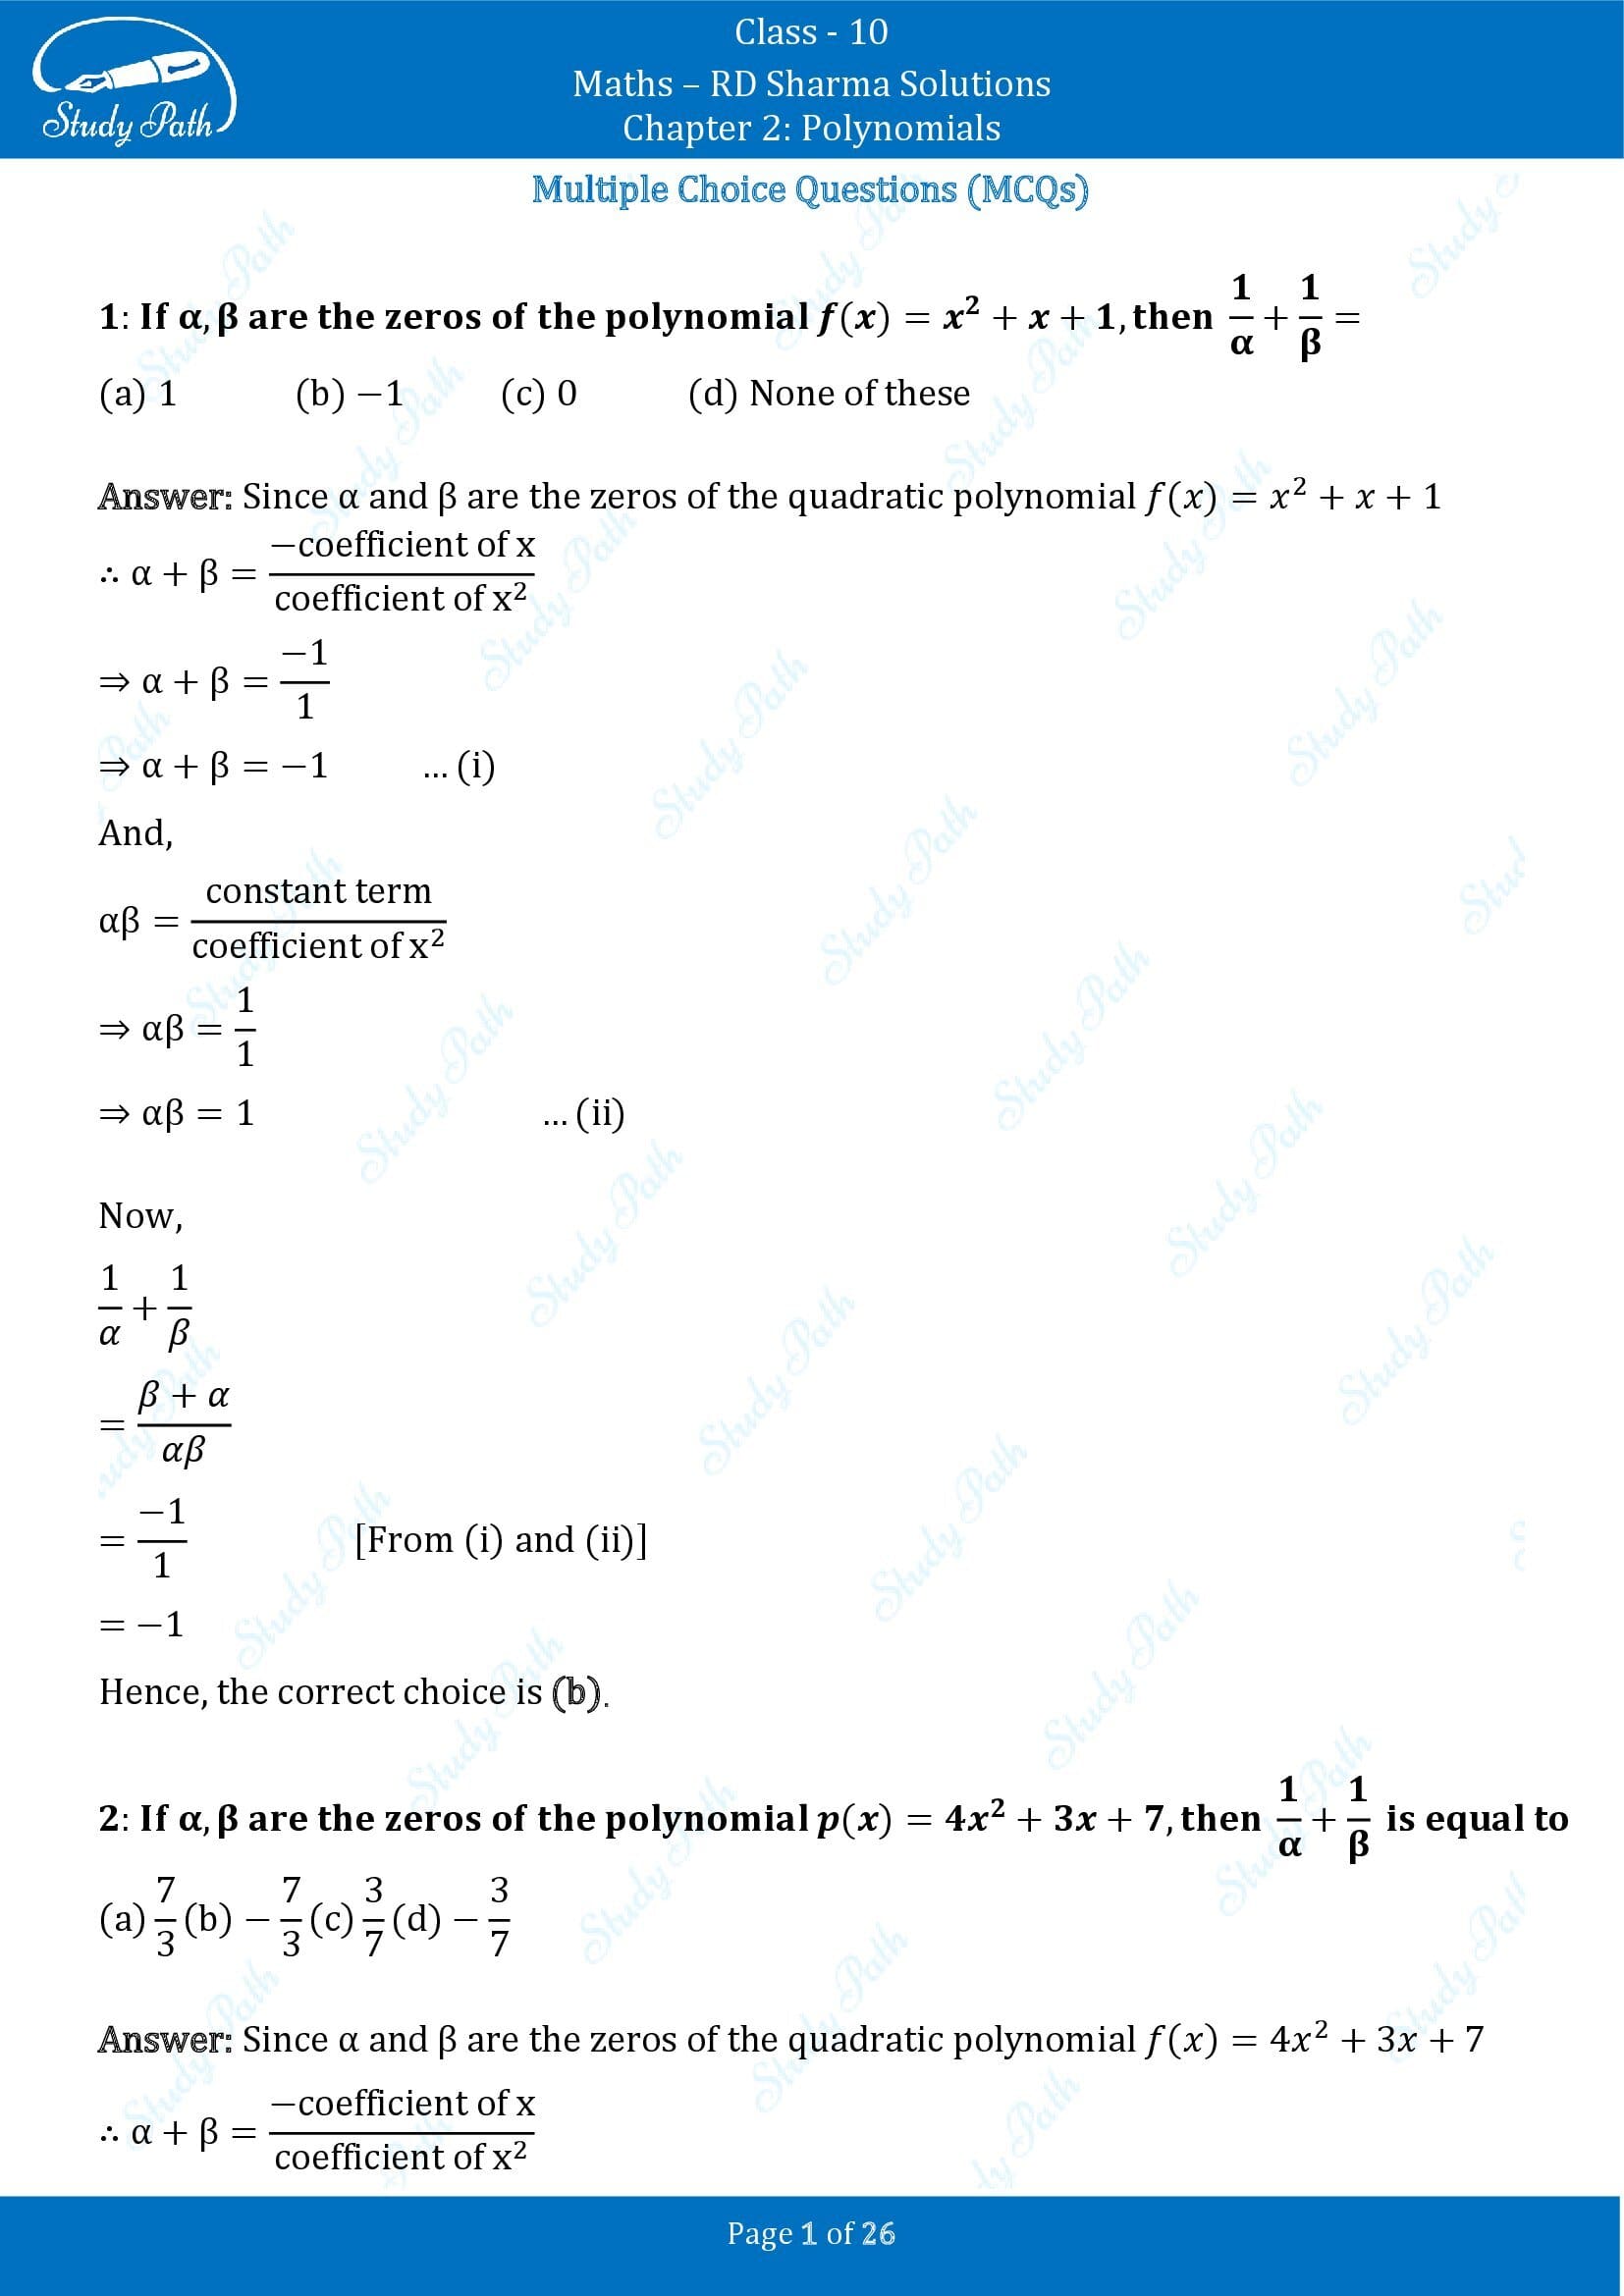 RD Sharma Solutions Class 10 Chapter 2 Polynomials Multiple Choice Questions MCQs 00001